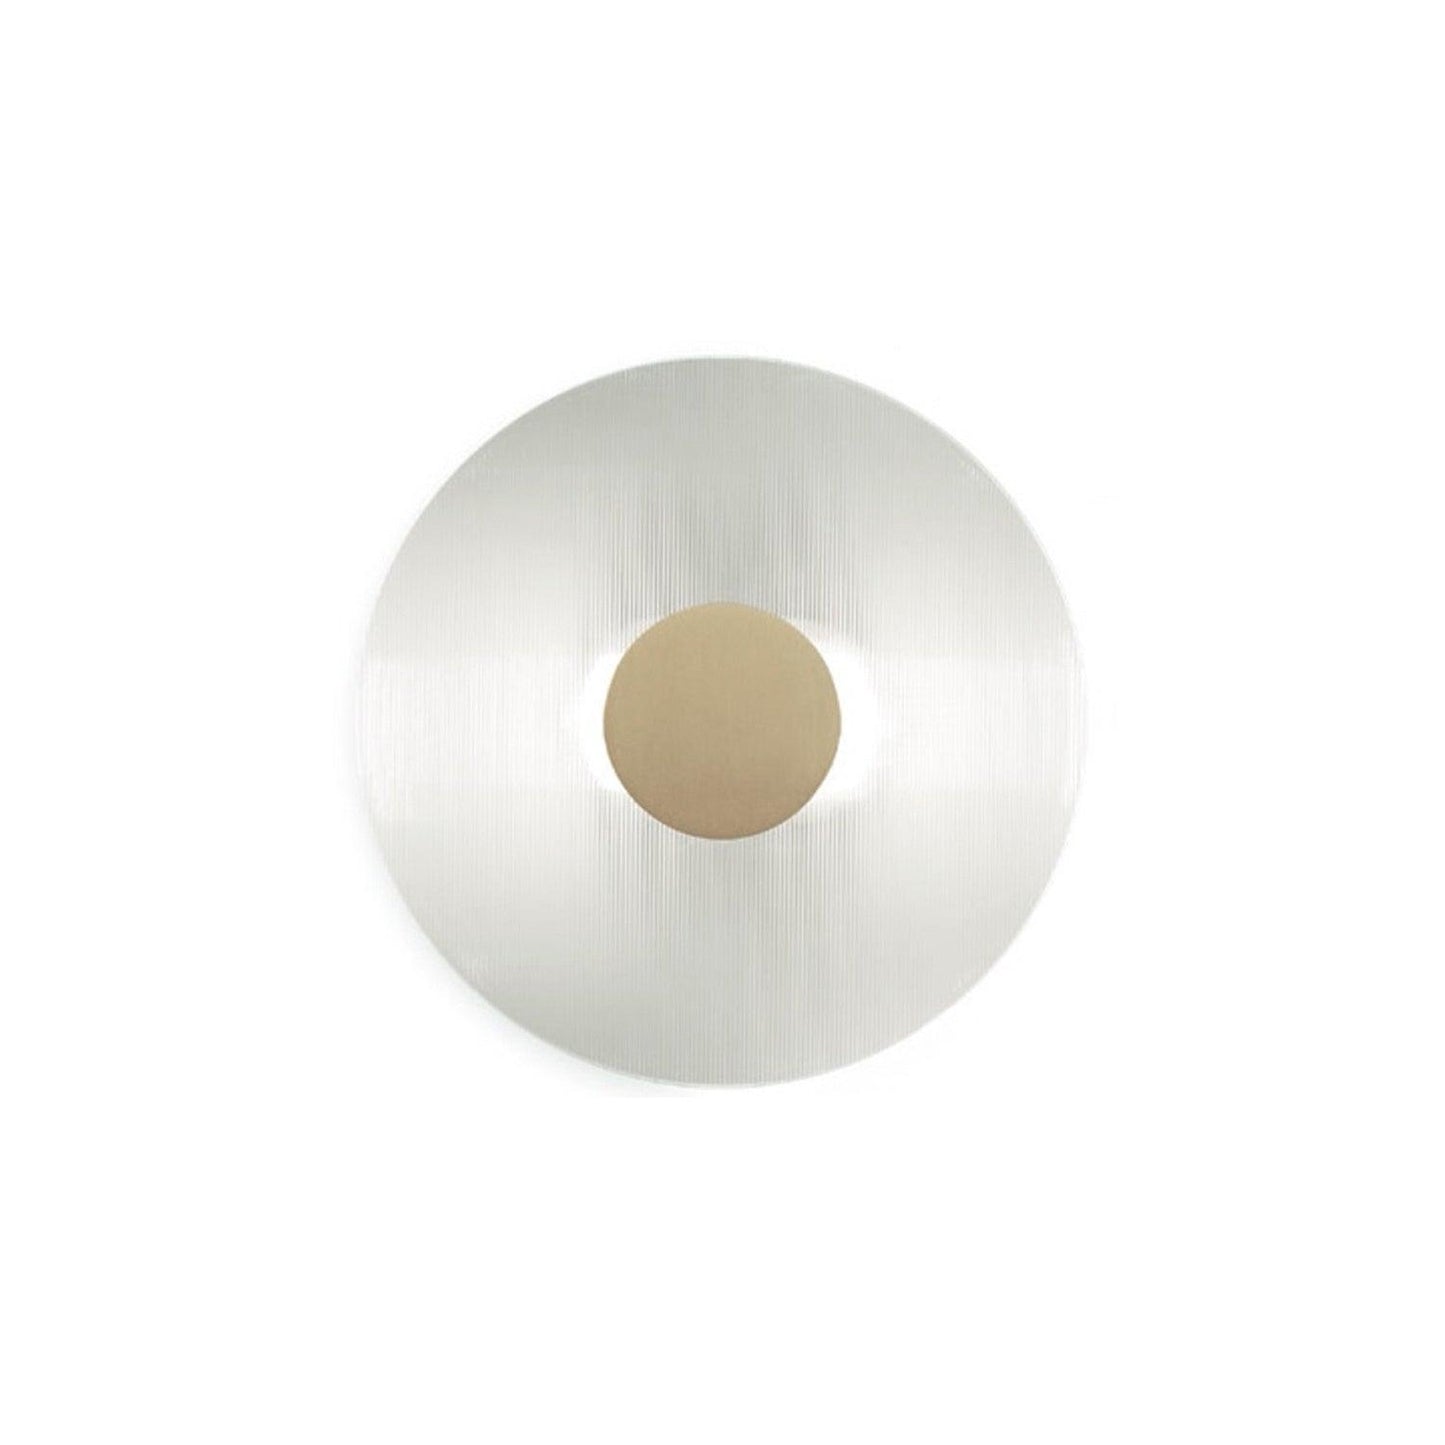 Button Wall Lamp